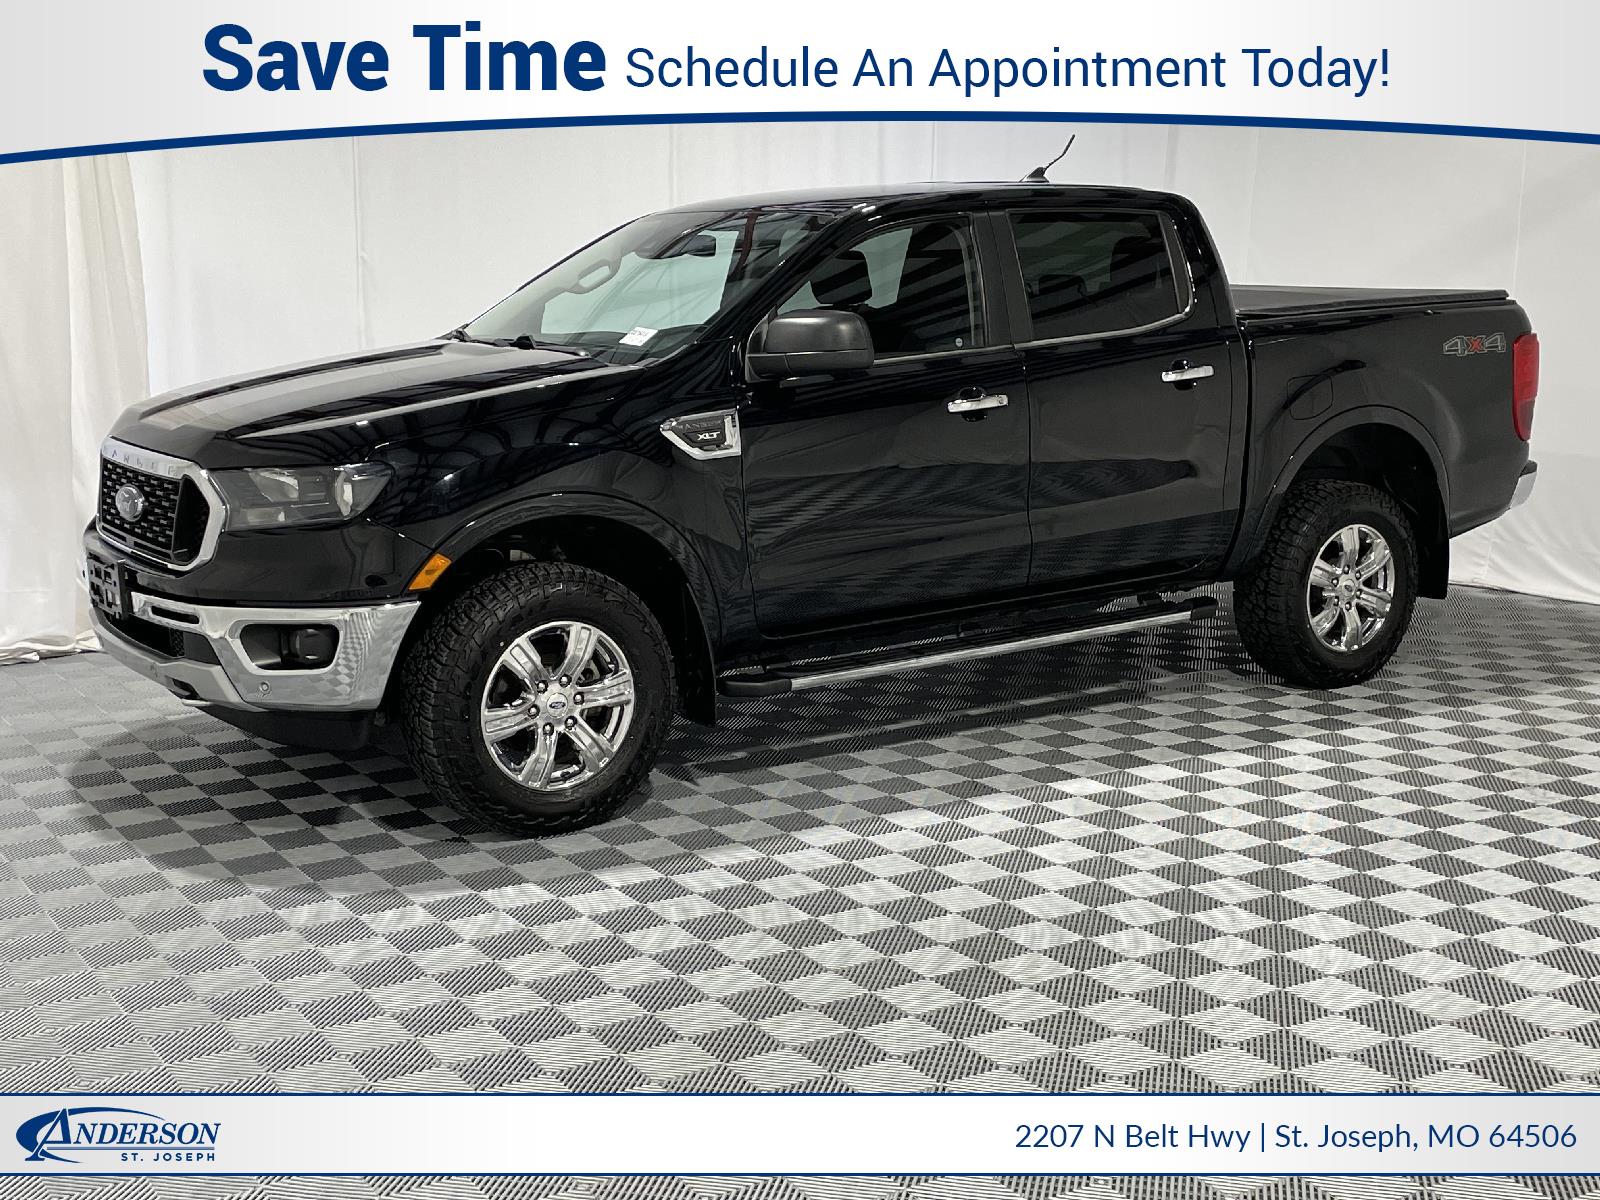 Used 2019 Ford Ranger XLT Stock: 3001541A